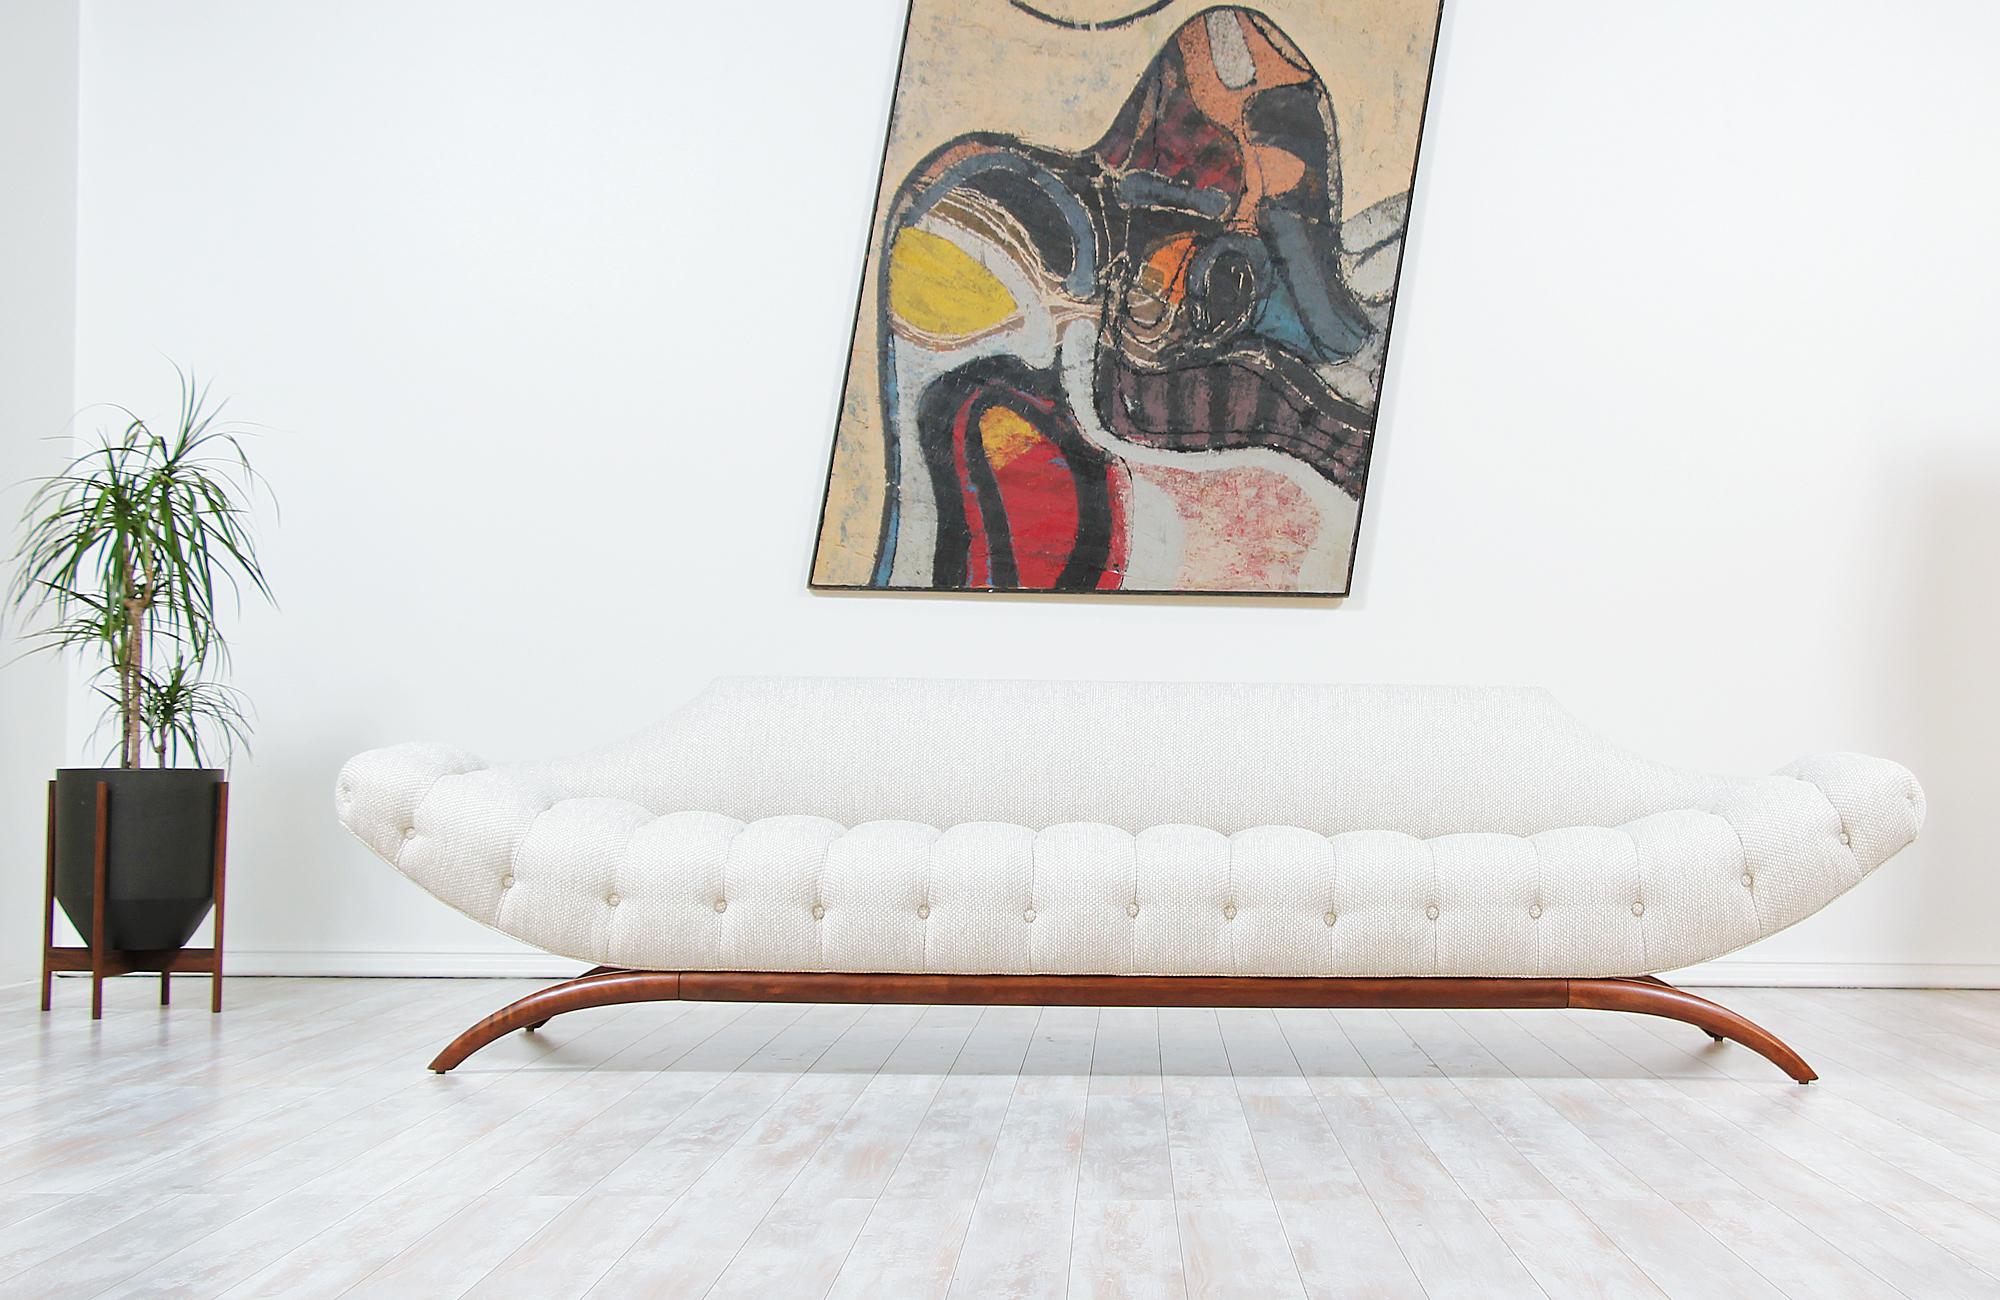 Extraordinary 'Gondola' sofa designed by Adrian Pearsall for craft associates in the United States, circa 1960s. A comfortable design crafted with a finely sculpted walnut wood base. The fluid lines and gondola shaped seat are both inviting and